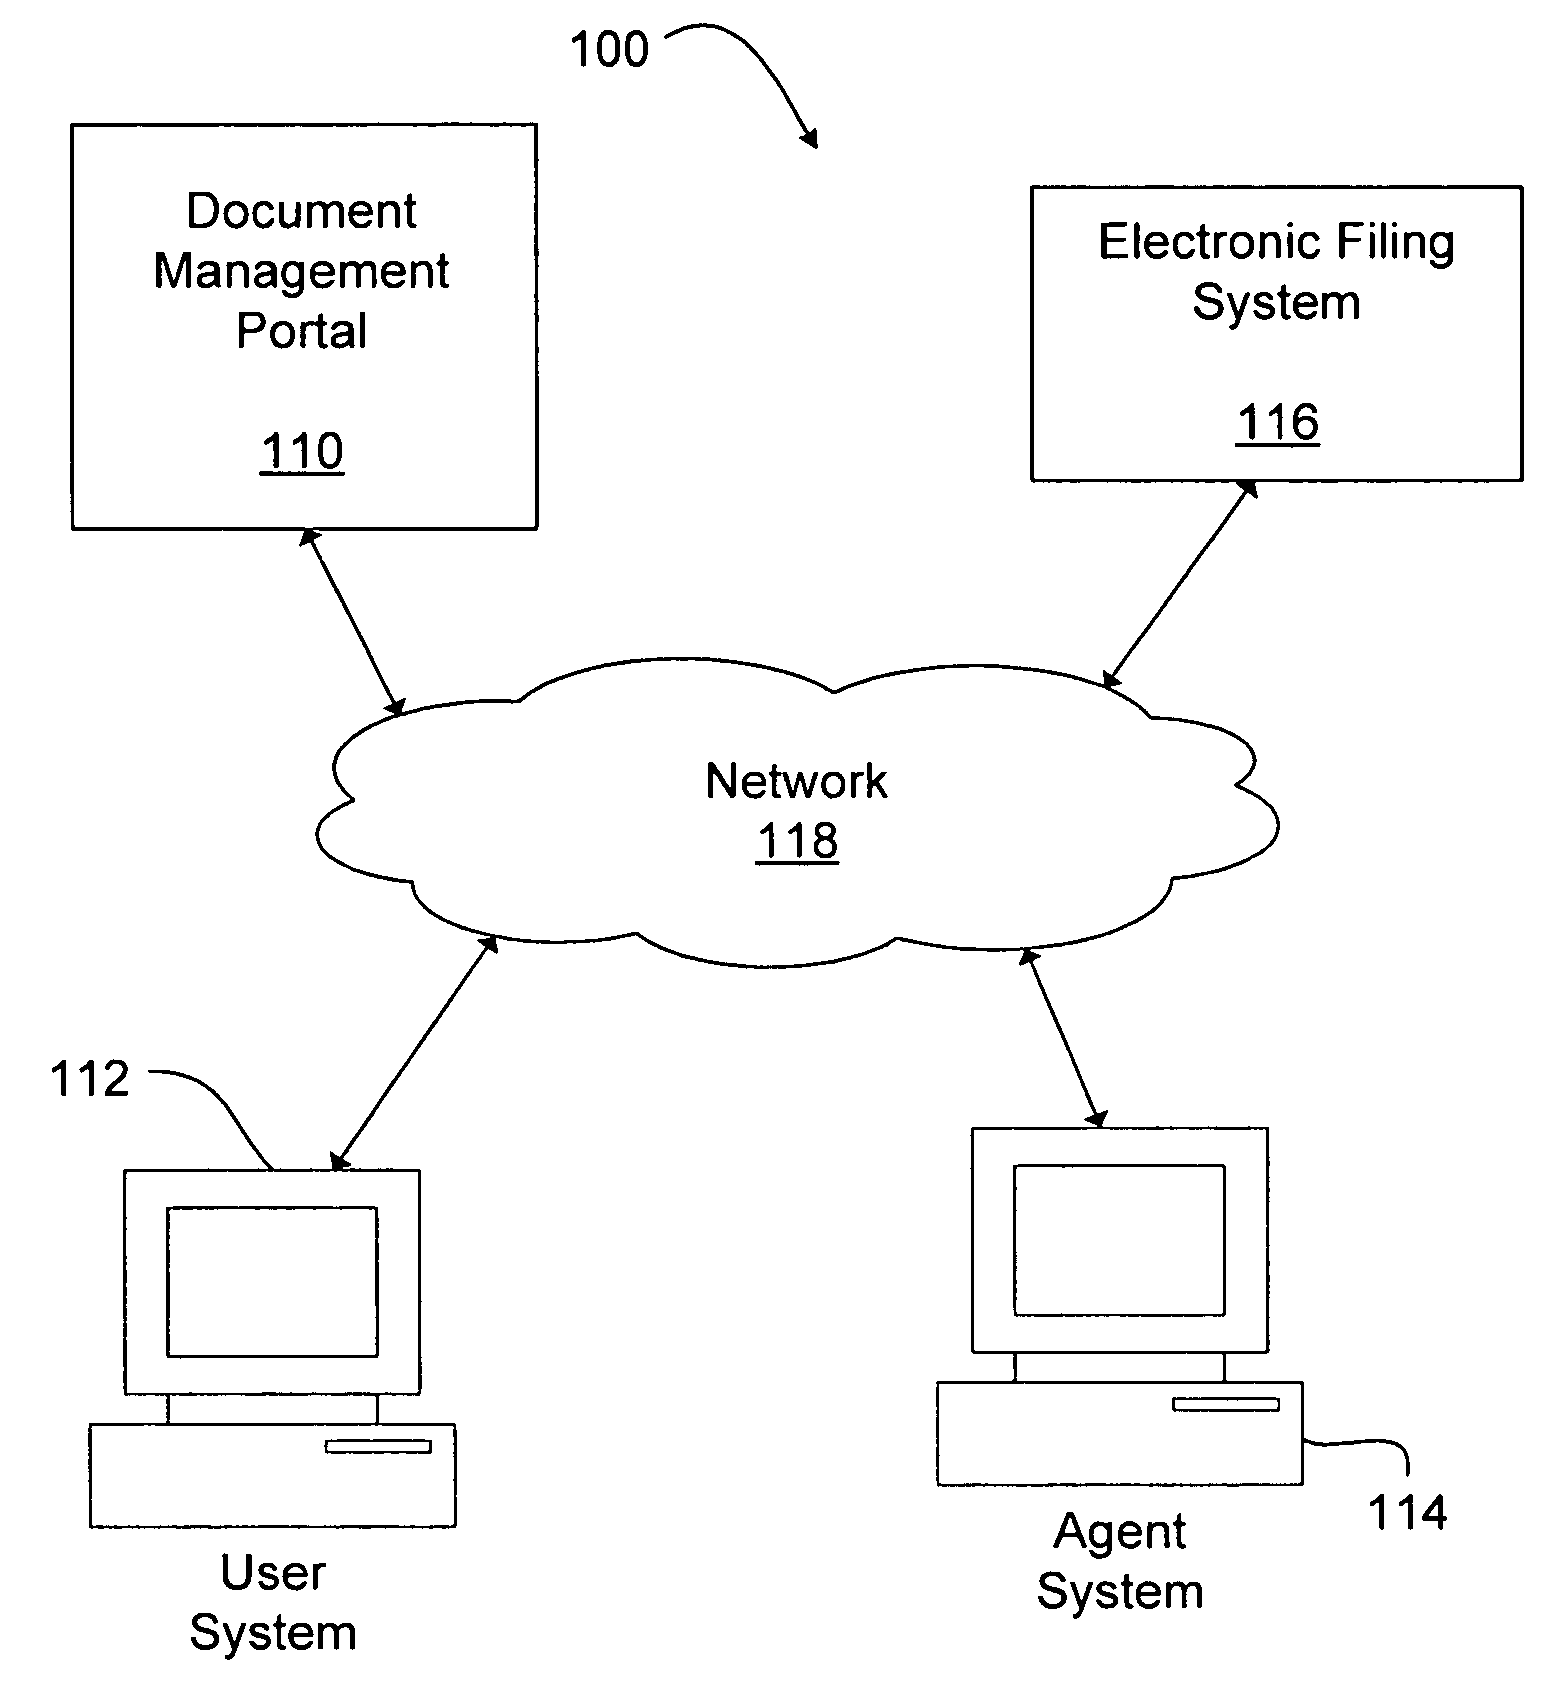 Systems and methods for document project management, conversion, and filing